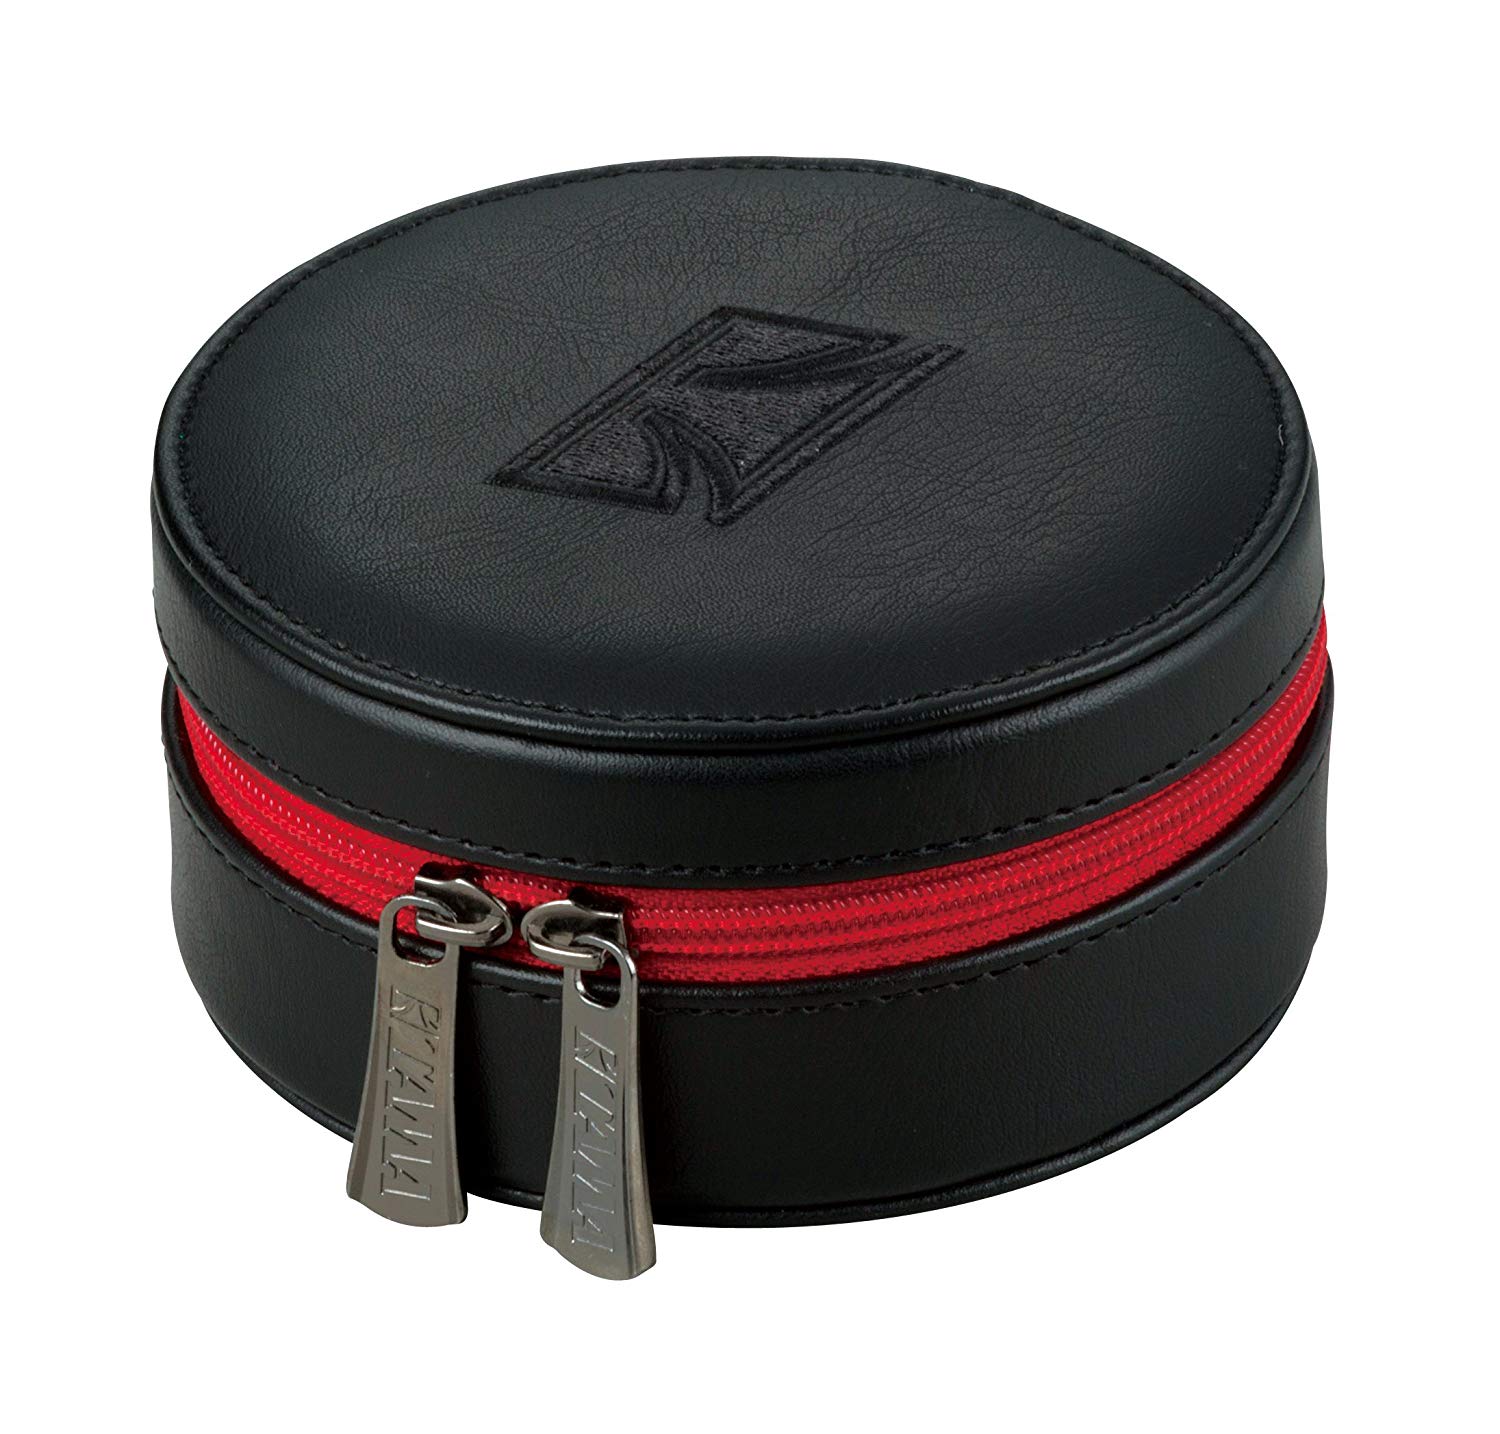 An image of Tama TW2B Carry Case for TW200 Tension Watch | PMT Online